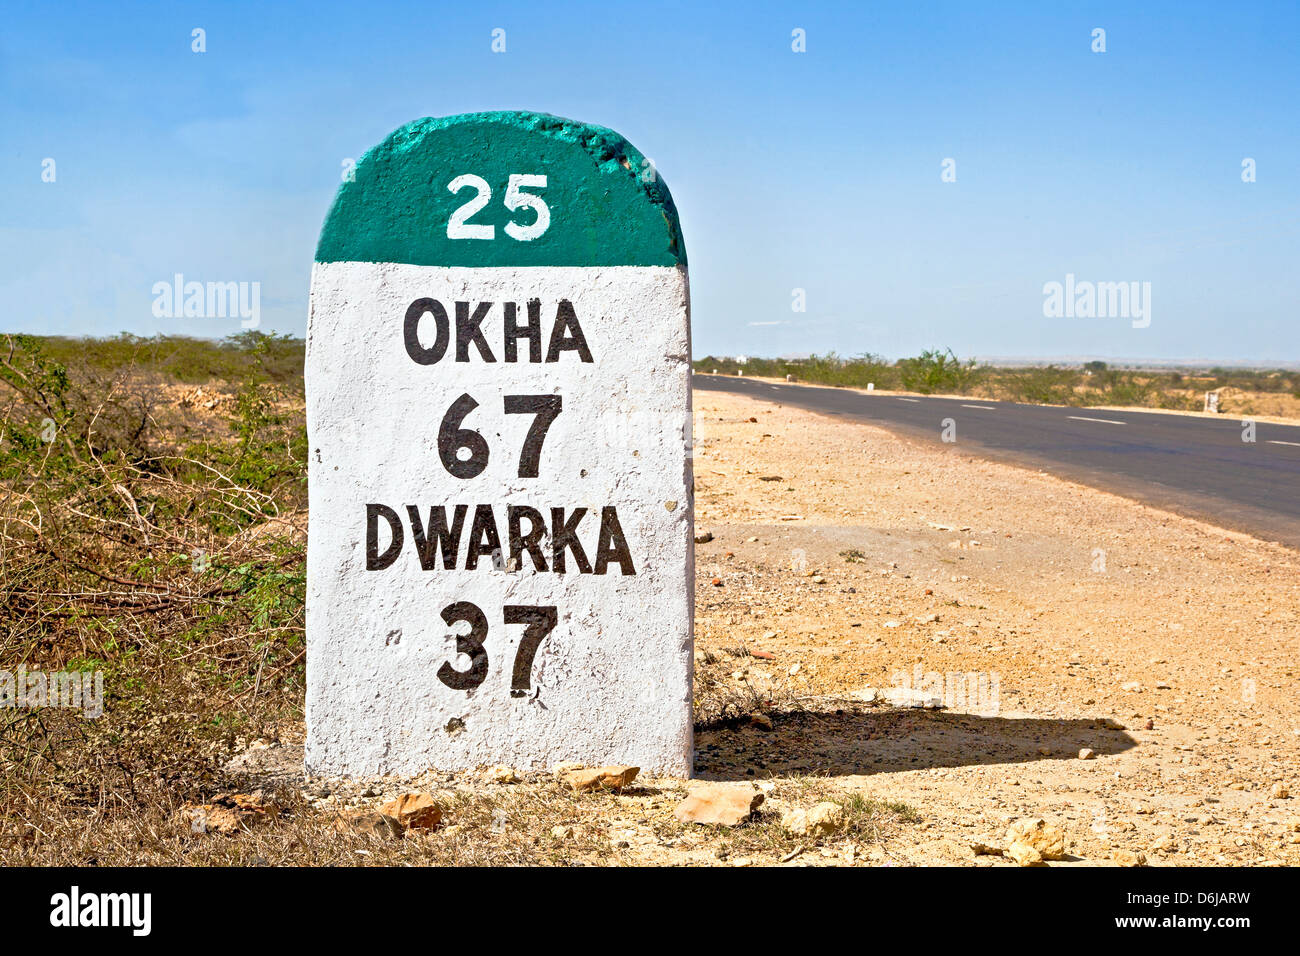 Gujarat India, the 37 kilometers Milestone to Dwarka on the state highway 25 which runs through a barren part of the country Stock Photo